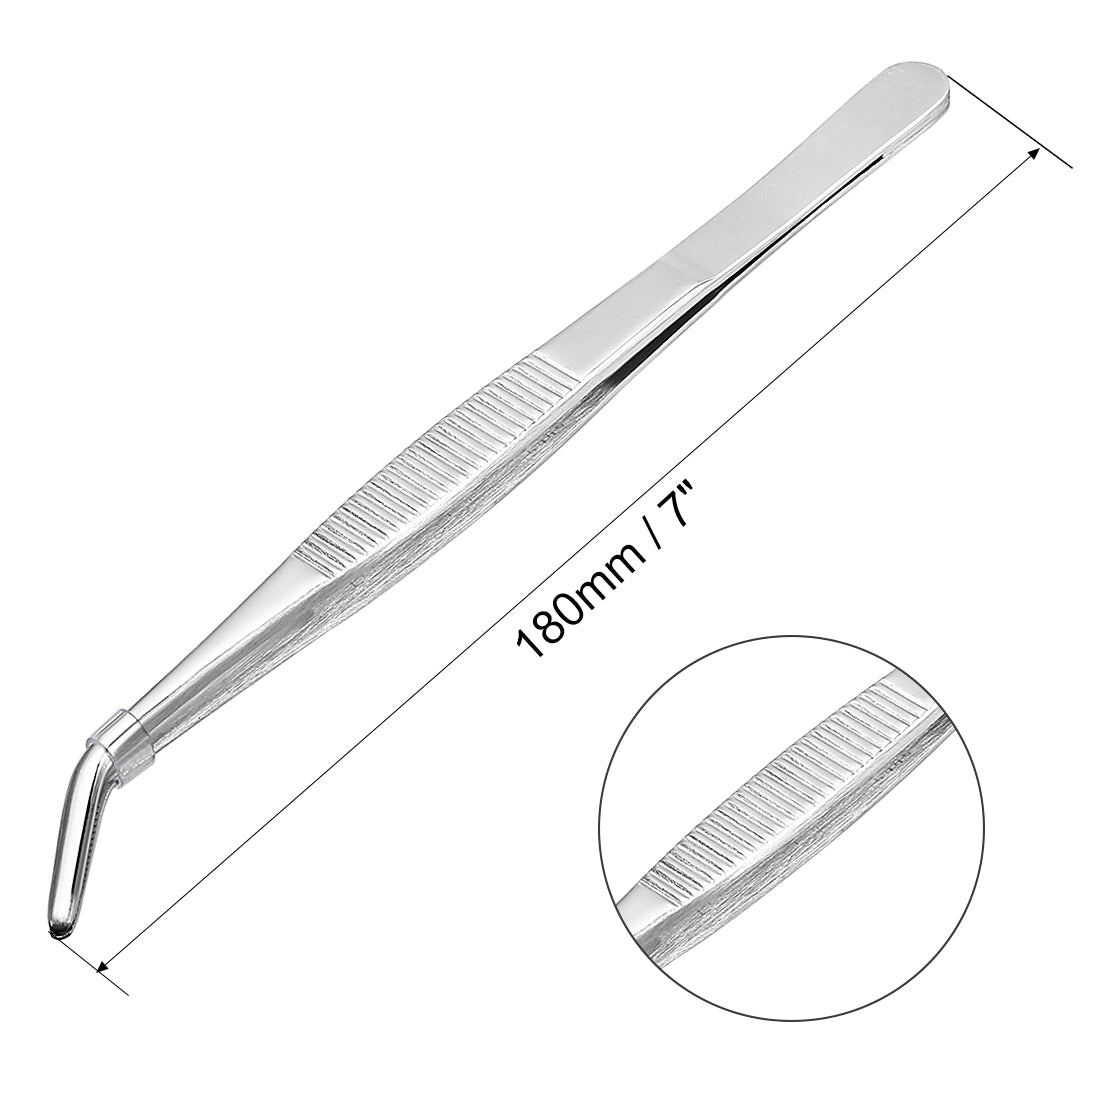 uxcell Uxcell Stainless Steel Tweezers with Curved Serrated Tip, 7-Inch Length